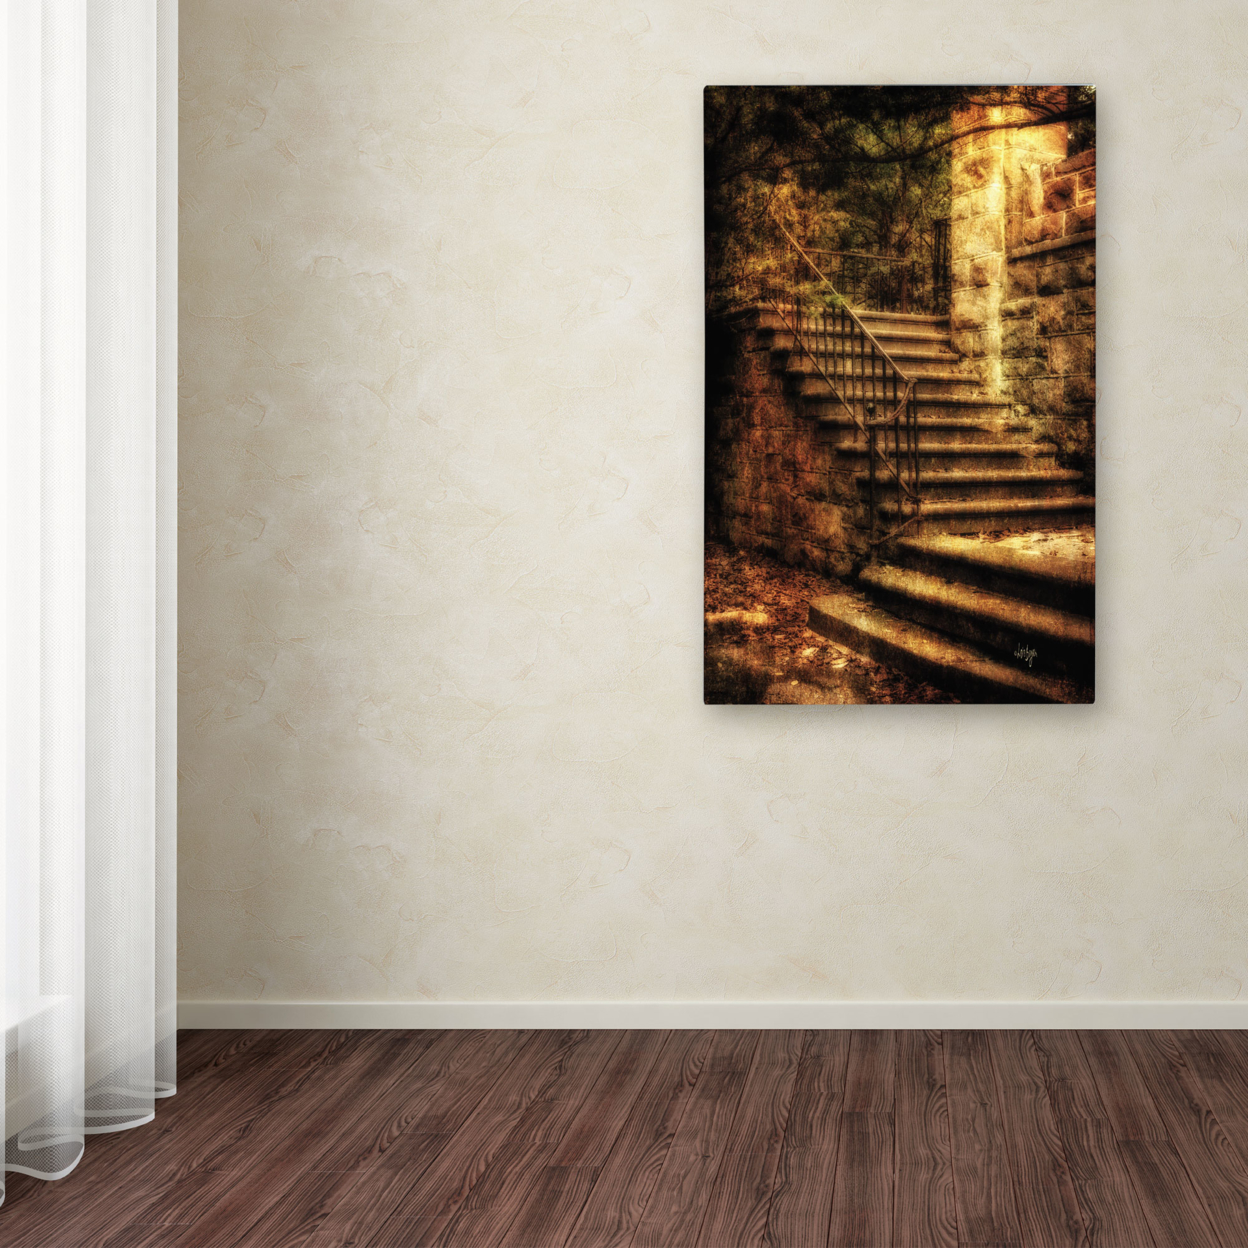 Lois Bryan 'Abandoned Stone Staircase' Canvas Art 16 X 24